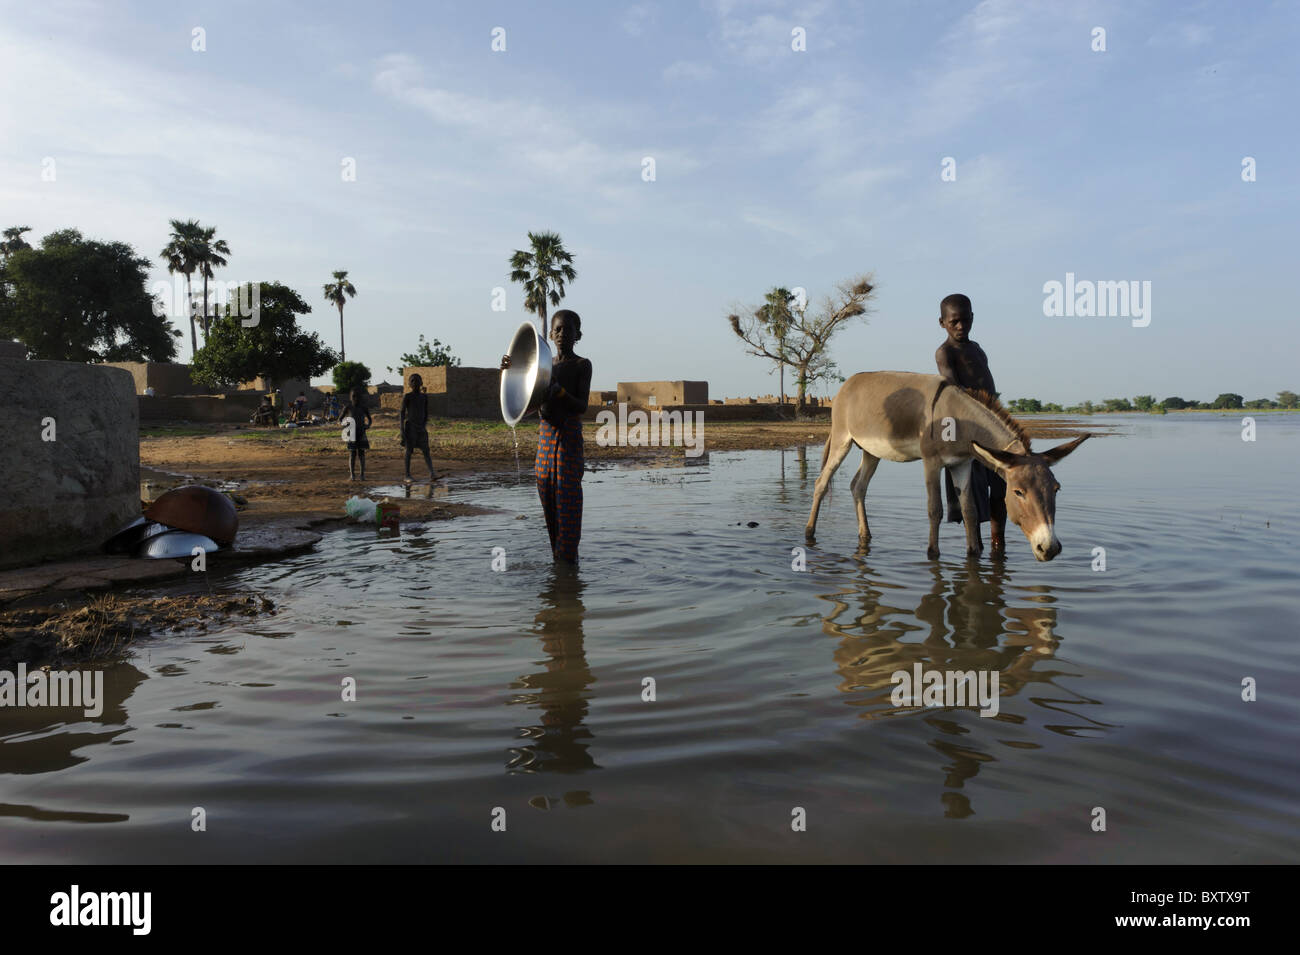 Young boys and donkey standing in the water of the Bani River near Djenné, Mali Stock Photo